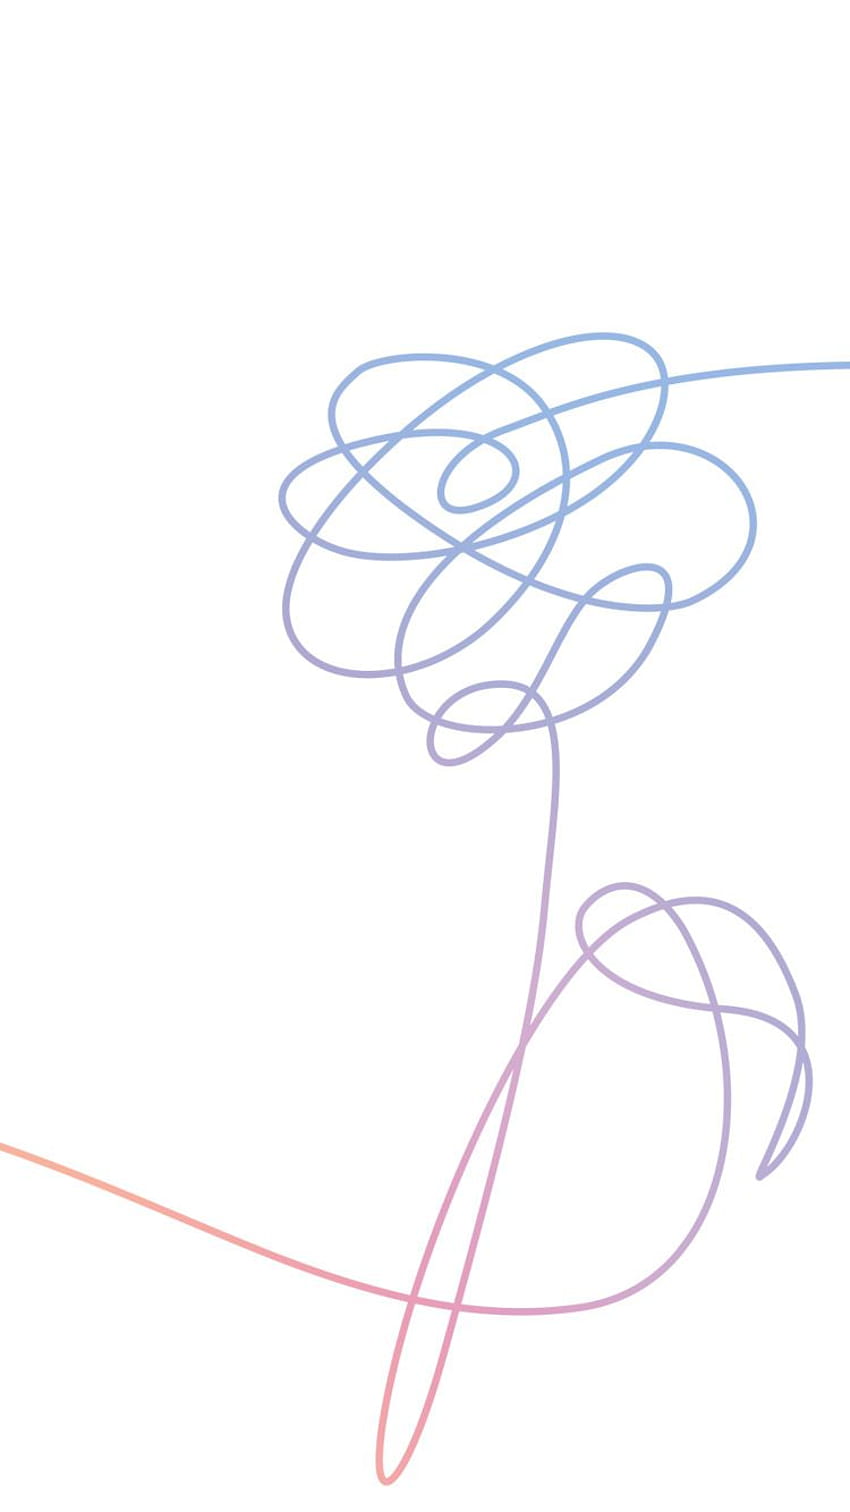 taekookslostjams had the idea to make the BTS Love Yourself flower, bts love yourself her HD phone wallpaper